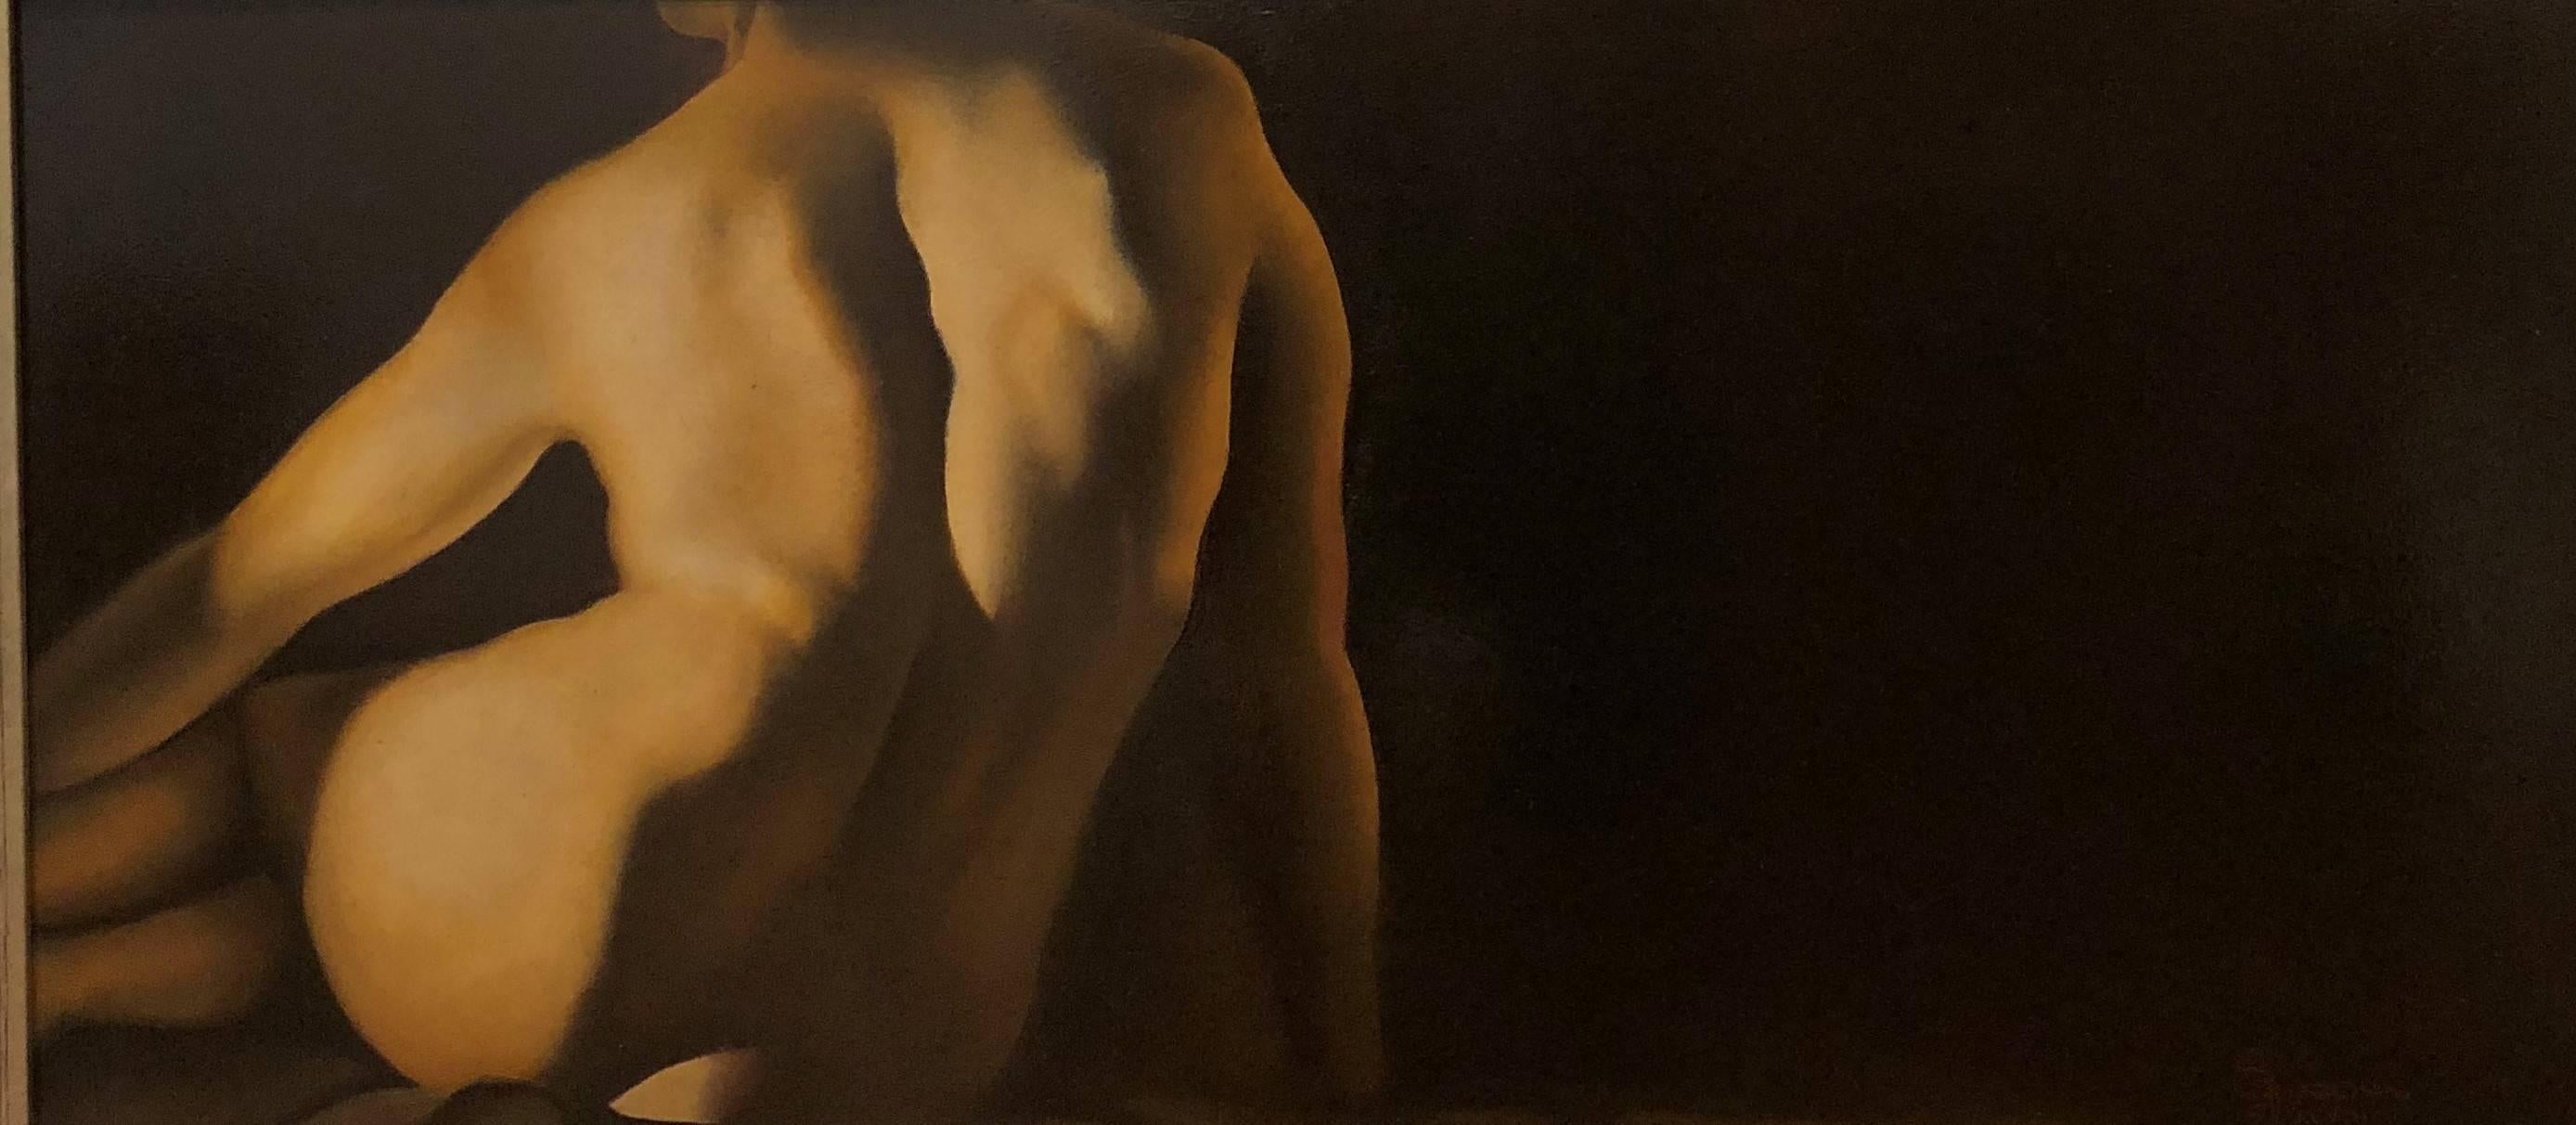 Figure F - Original Oil Painting of Nude Female Figure From Back in Soft Light - Black Nude Painting by Richard Gibbons